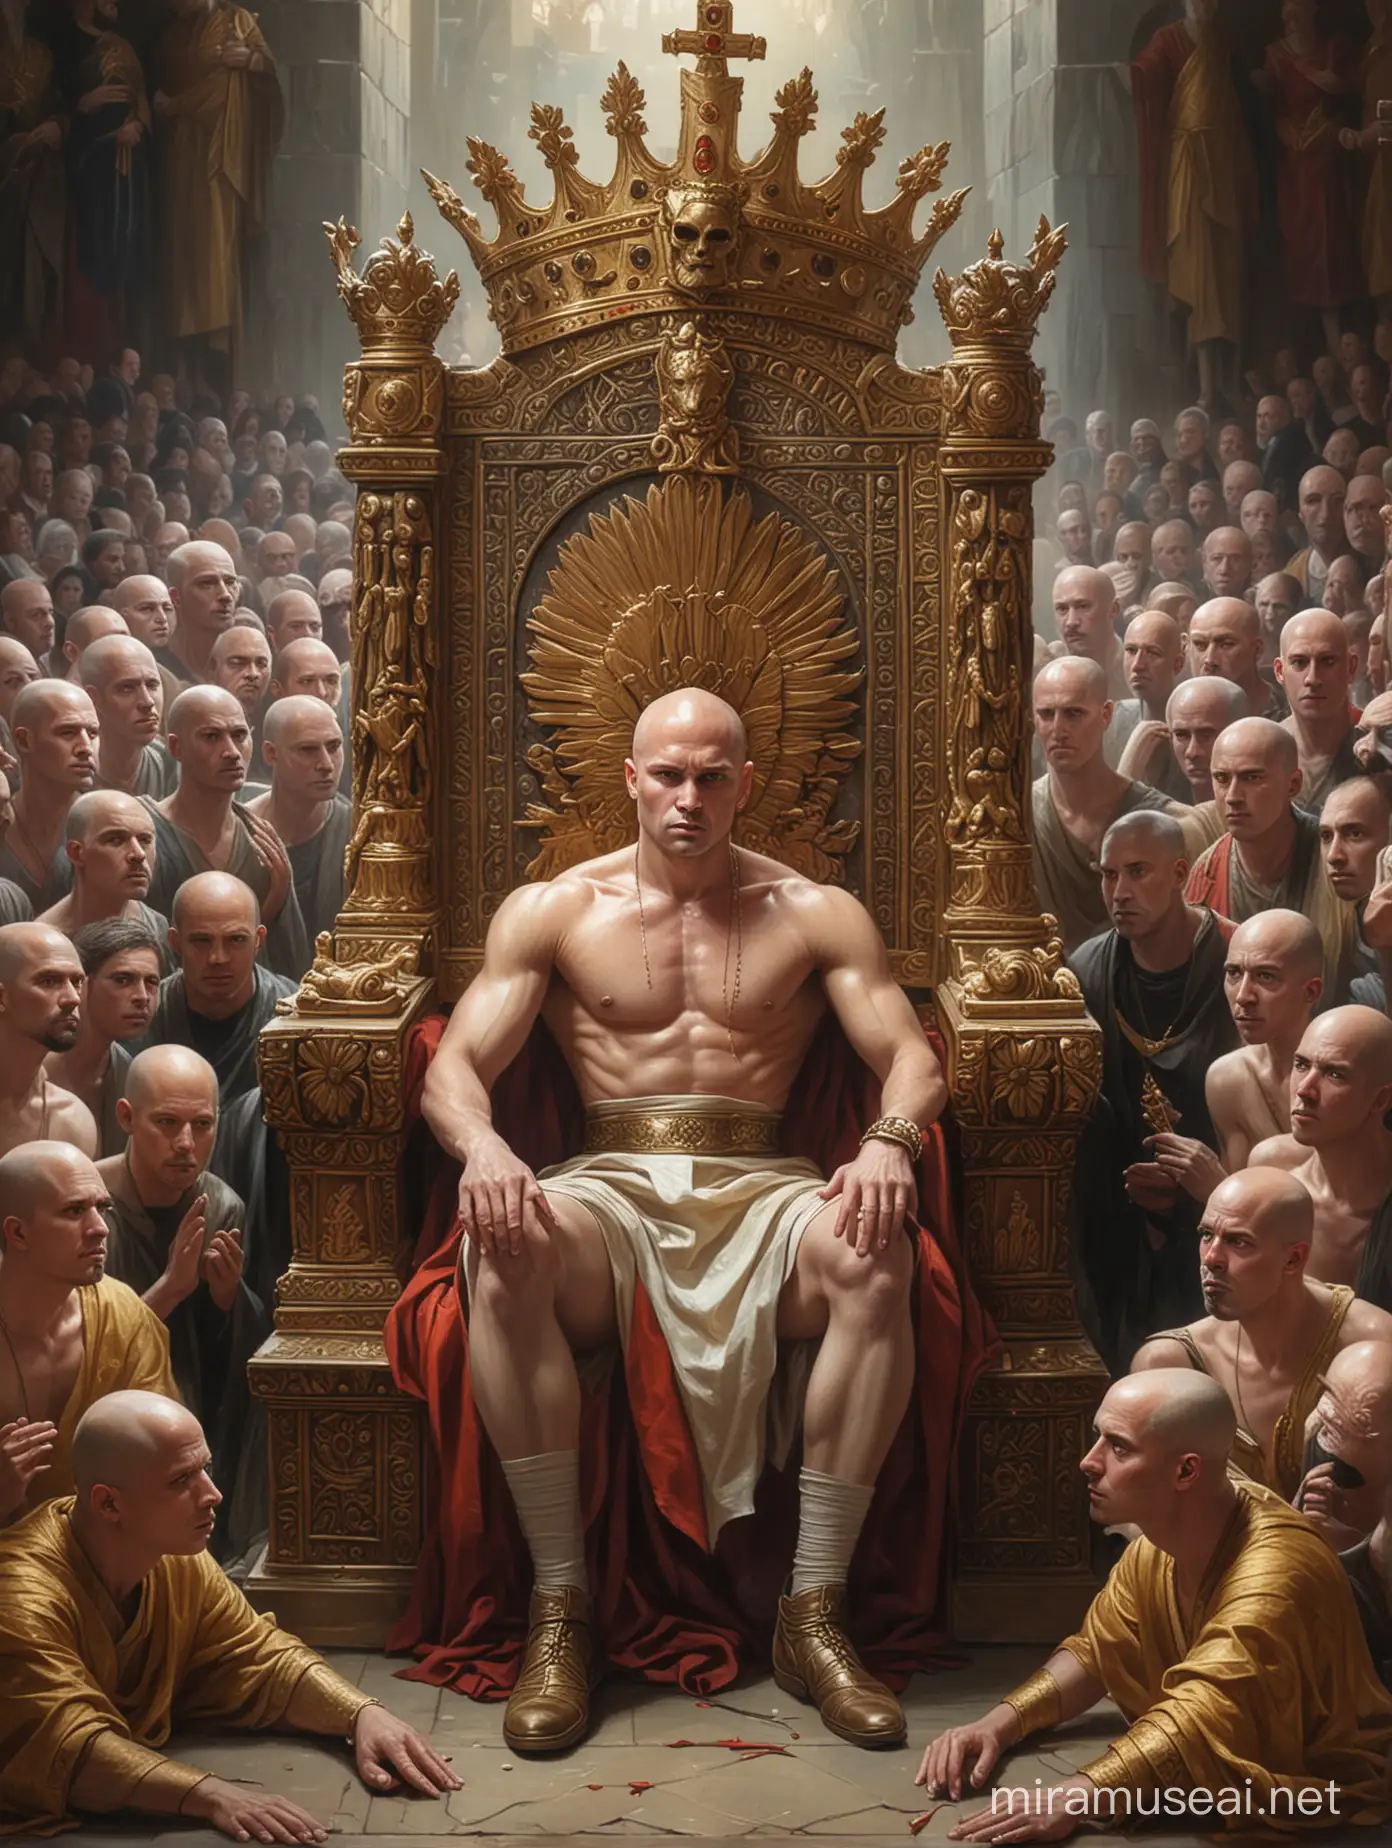 a bald-headed king, looks like a dick. sitting on the throne. surrounded by people who were worshiping him